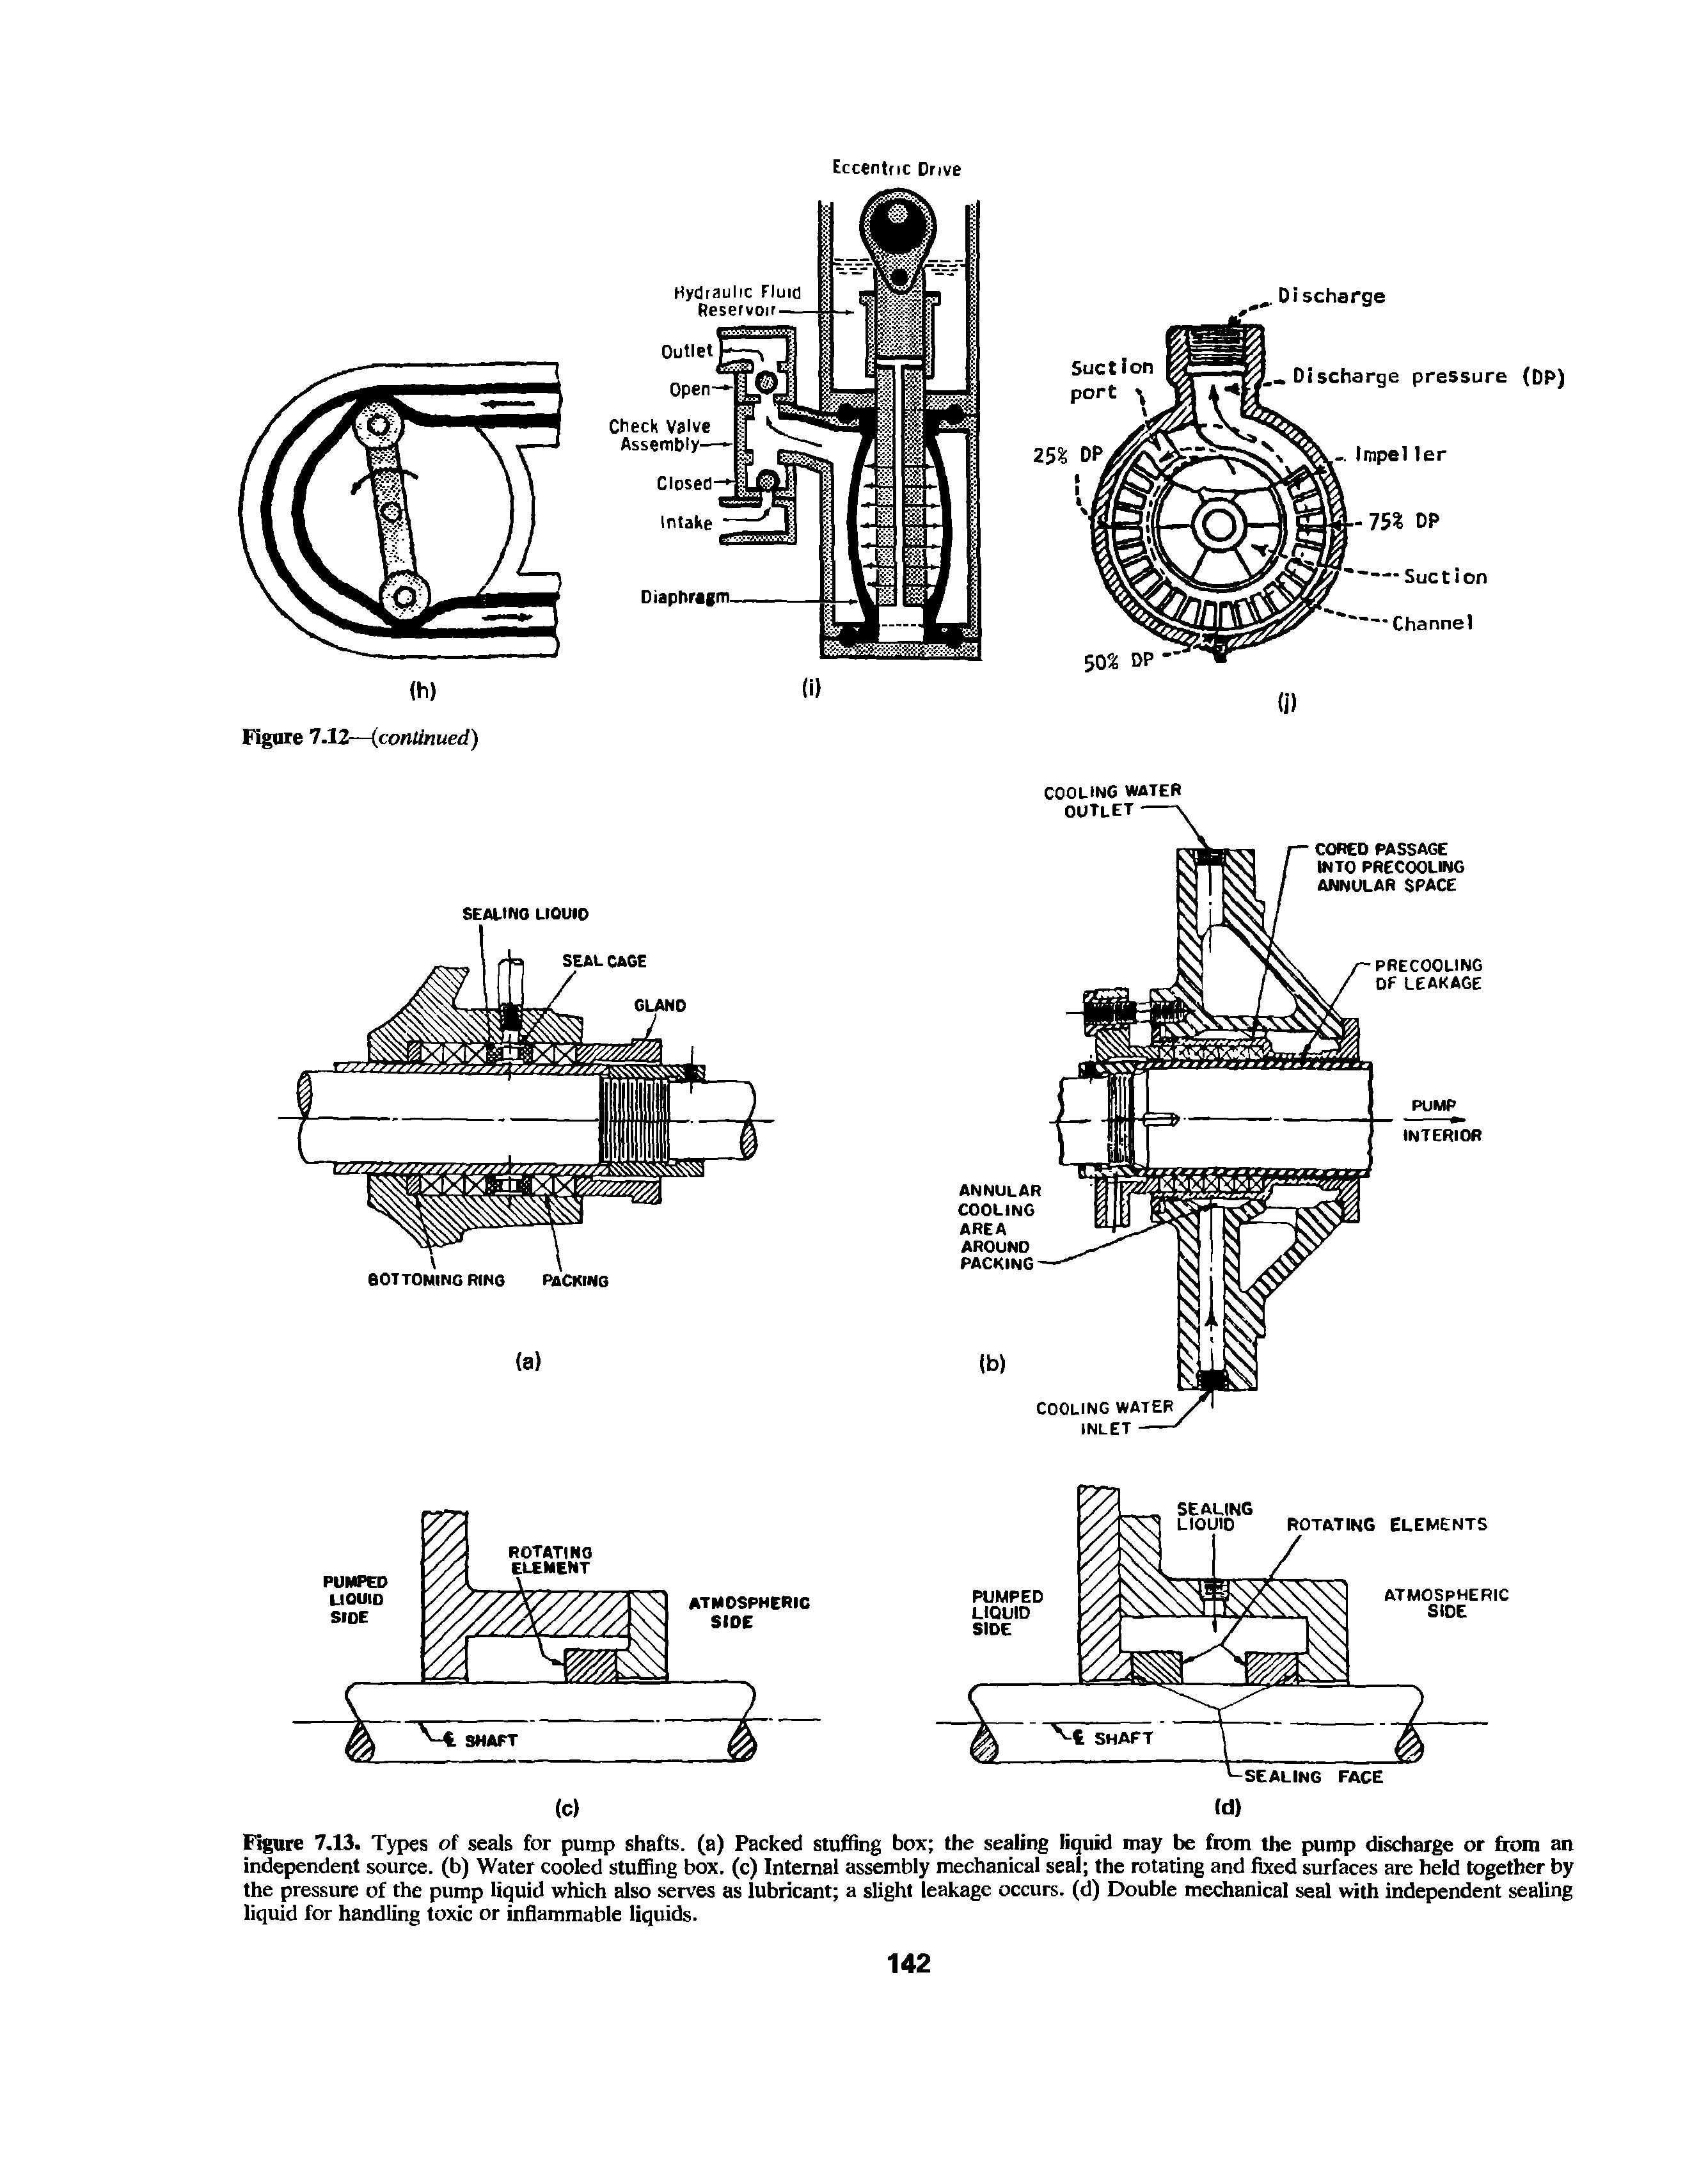 Figure 7.13. Types of seals for pump shafts, (a) Packed stuffing box the sealing liquid may be from the pump discharge or from an independent source, (b) Water cooled stuffing box. (c) Internal assembly mechanical seal the rotating and fixed surfaces are held together by the pressure of the pump liquid which also serves as lubricant a slight leakage occurs, (d) Double mechanical seal with independent sealing liquid for handling toxic or inflammable liquids.